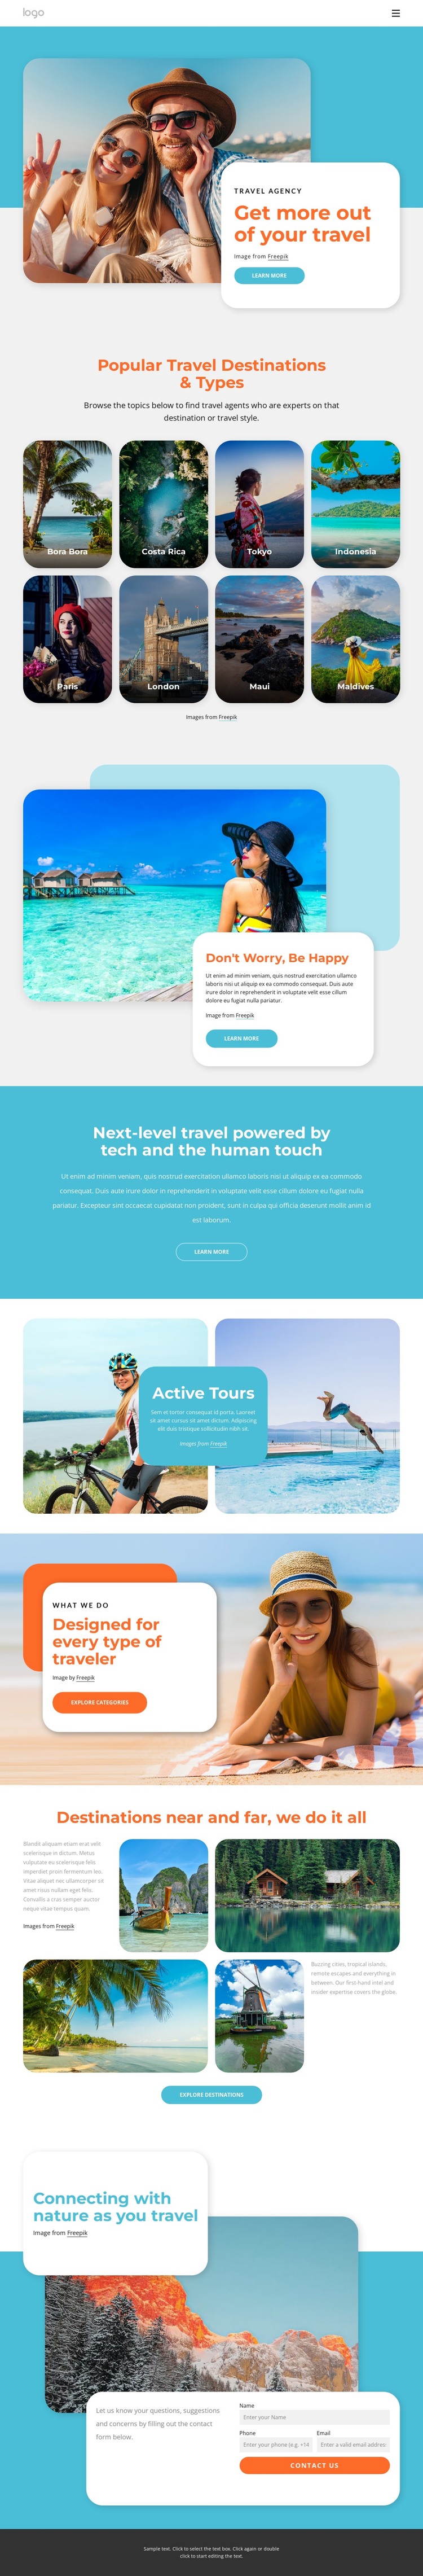 Get more out of travel with us Web Design